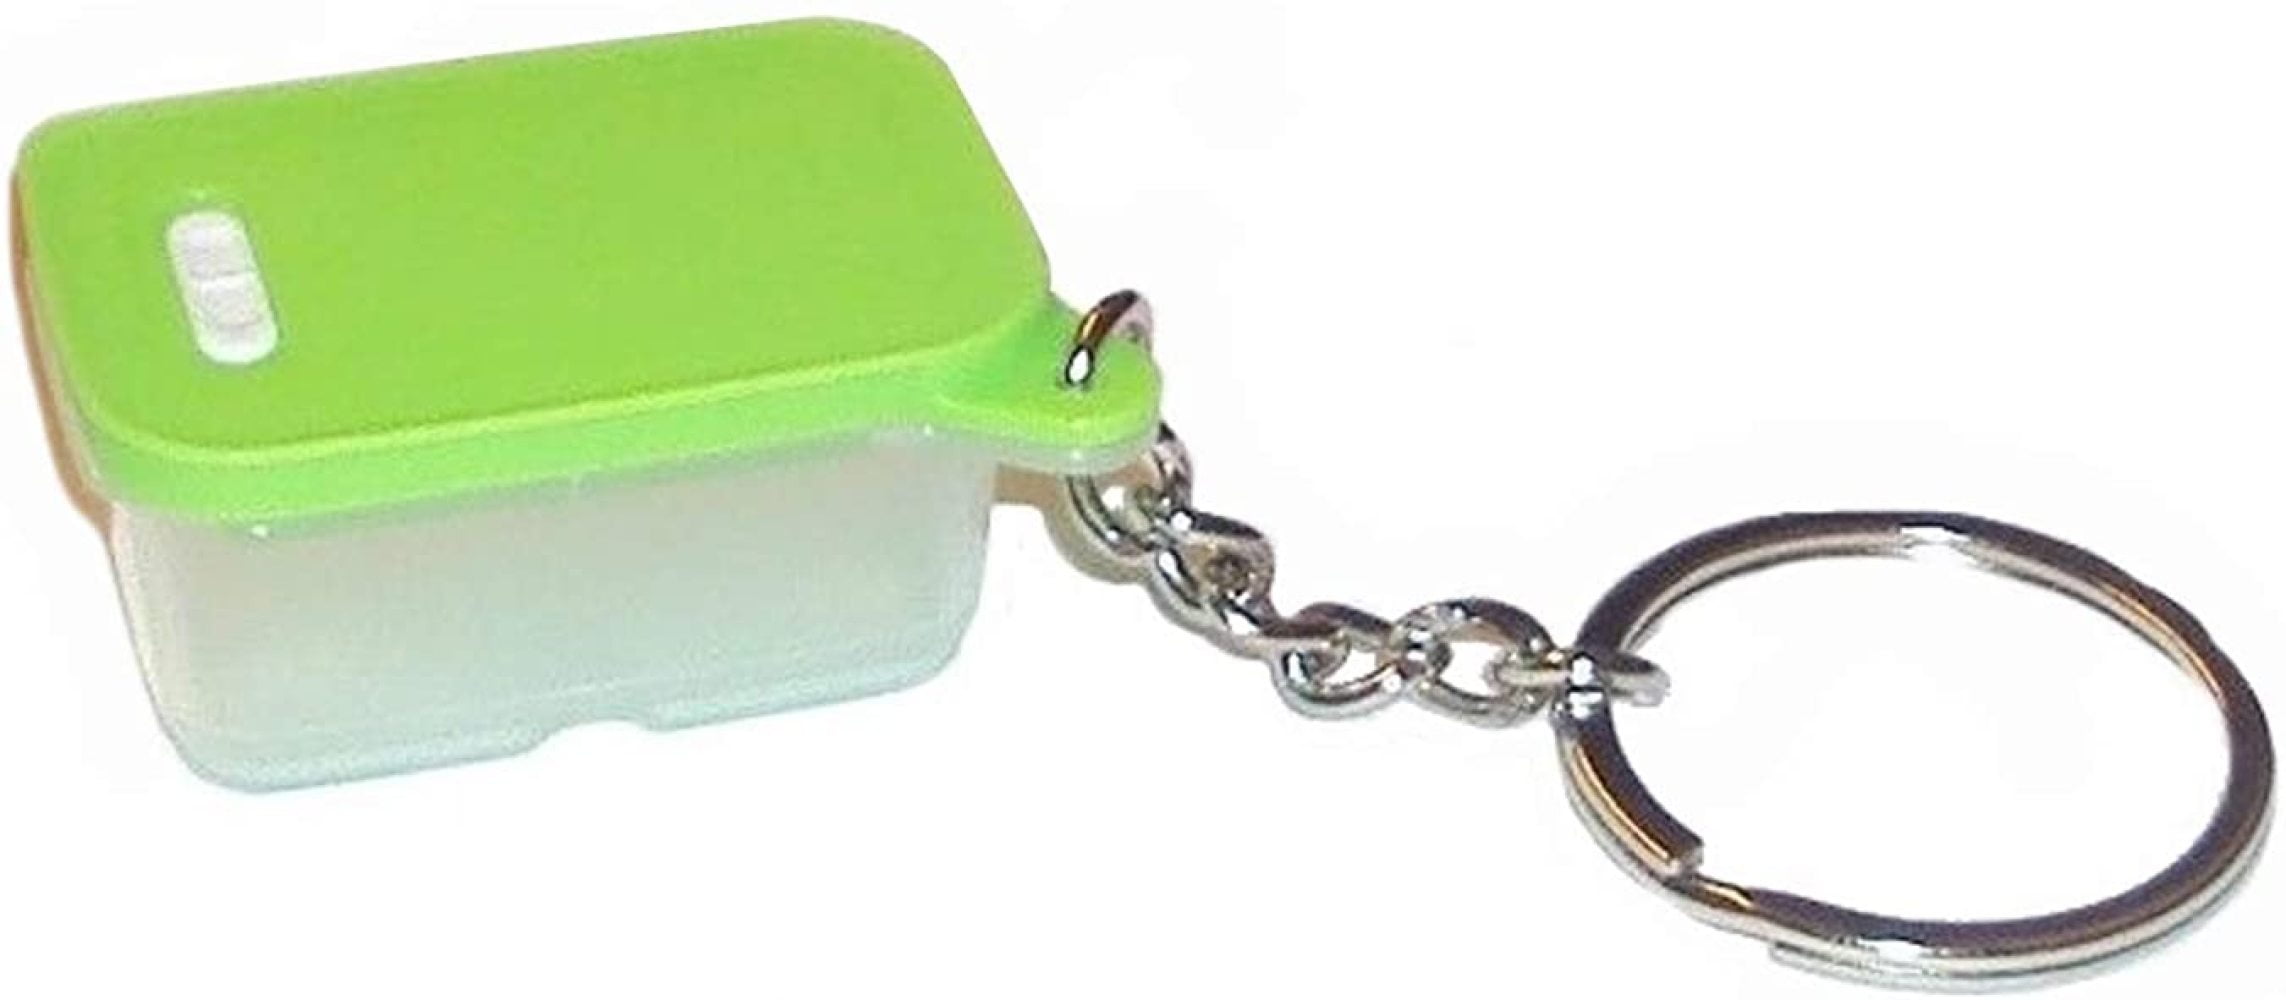 Tupperware Collectible Keychain Container  Set 5 in a Box  New 